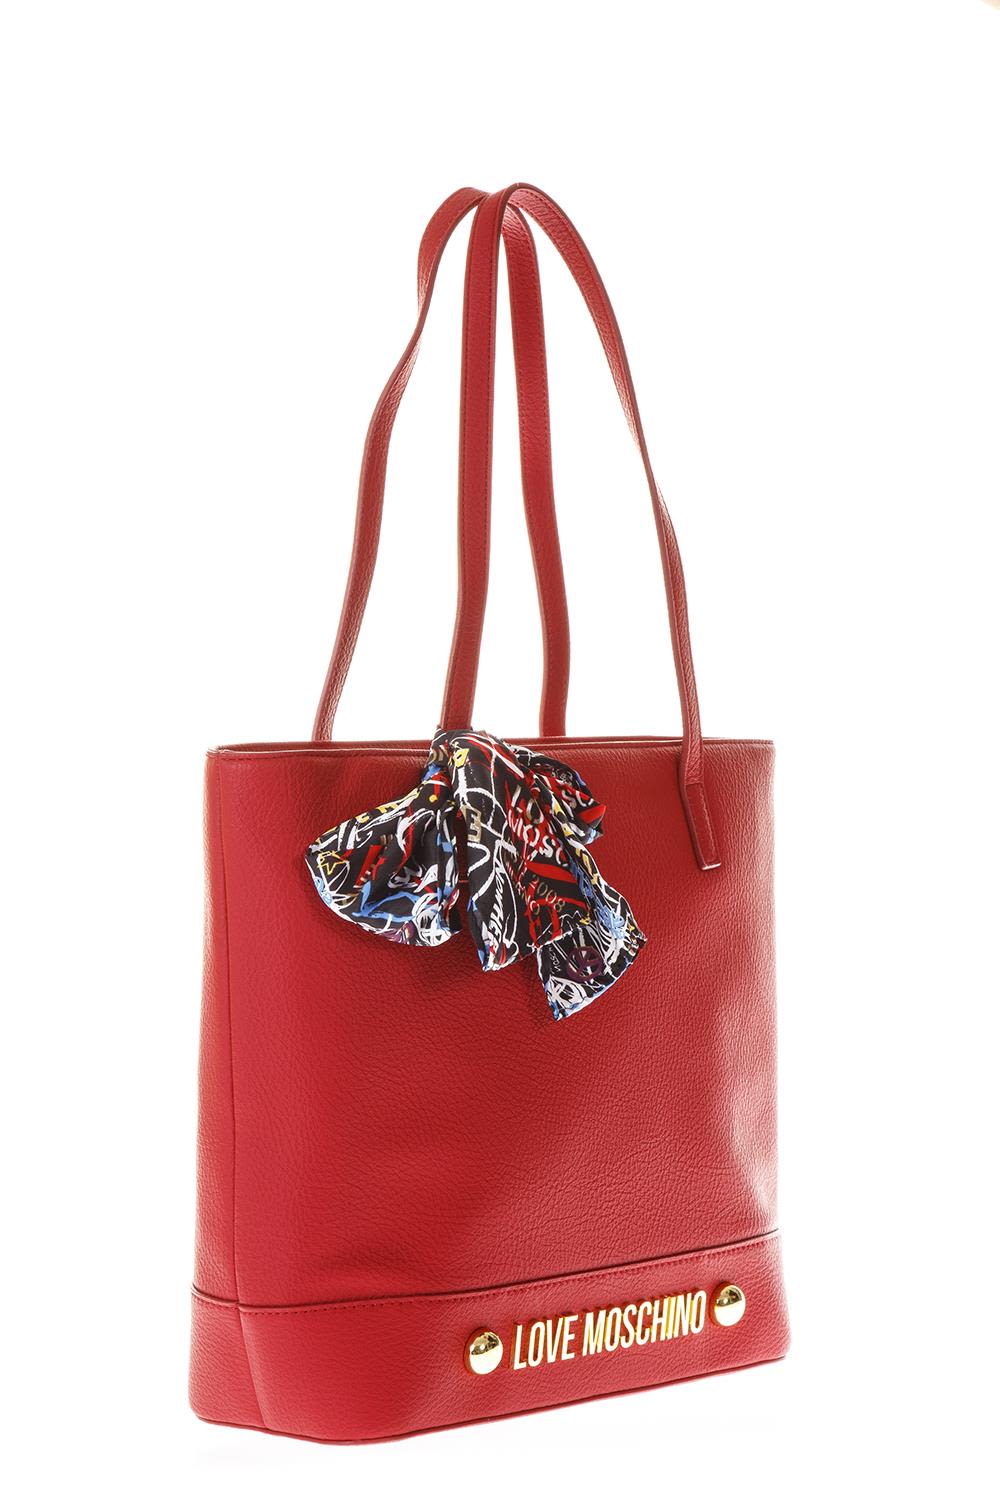 Love Moschino Love Moschino Red Love Moschino Handbag With Scarf Detail ...